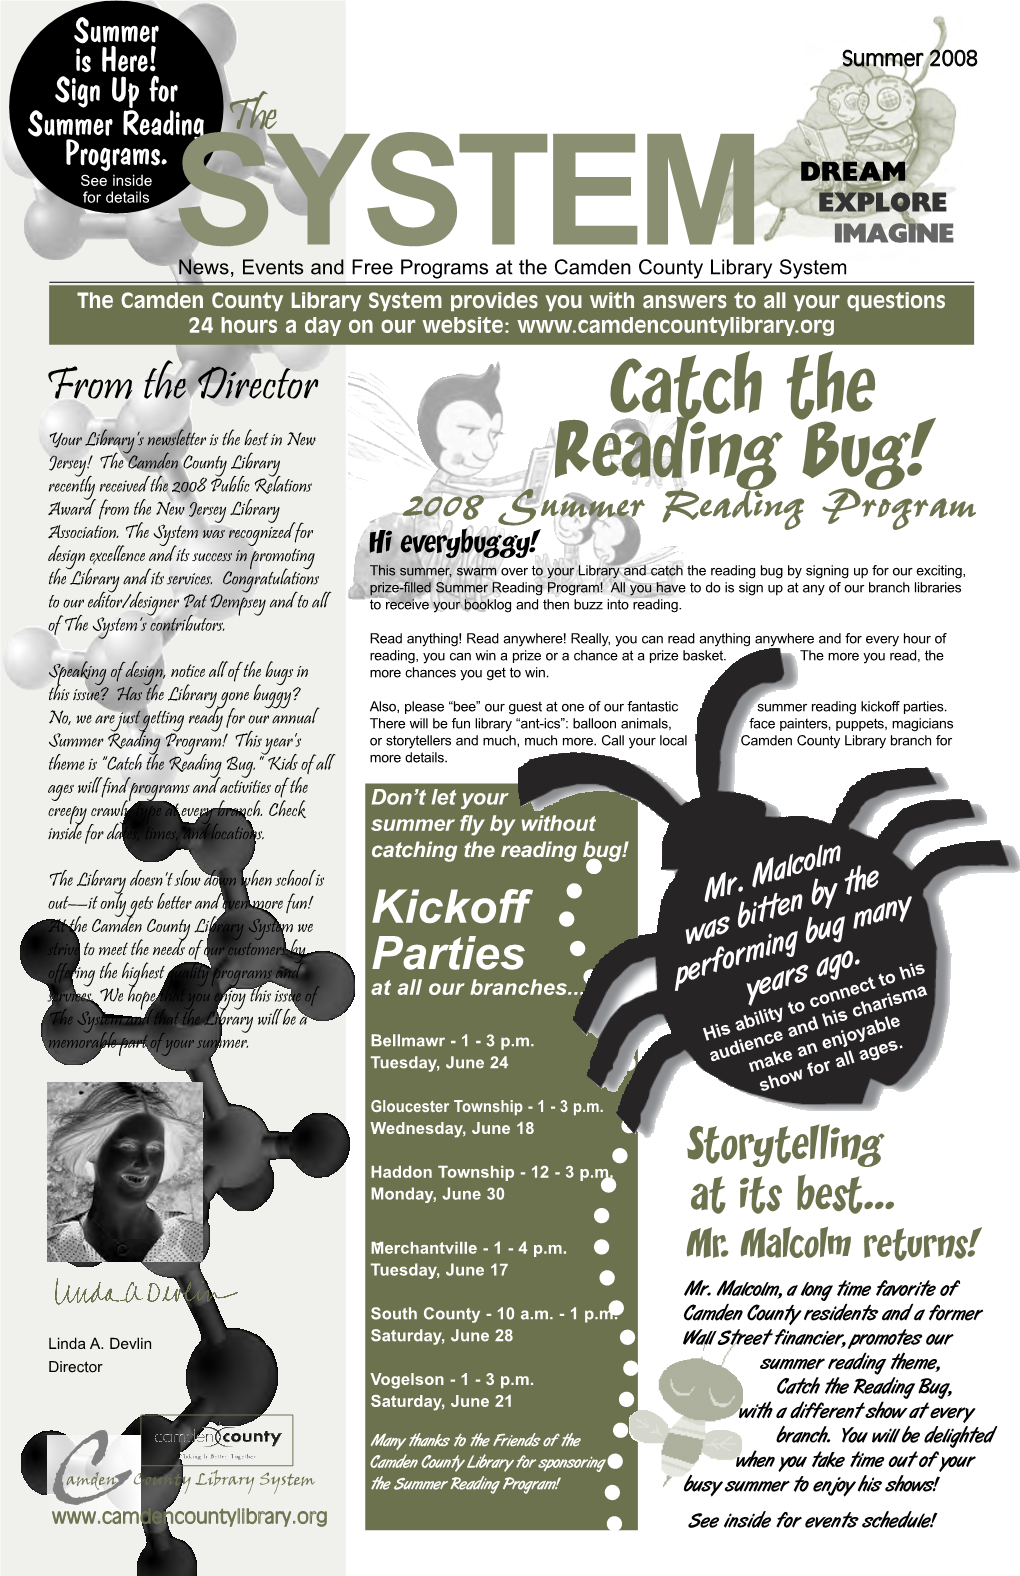 Catch the Reading Bug!